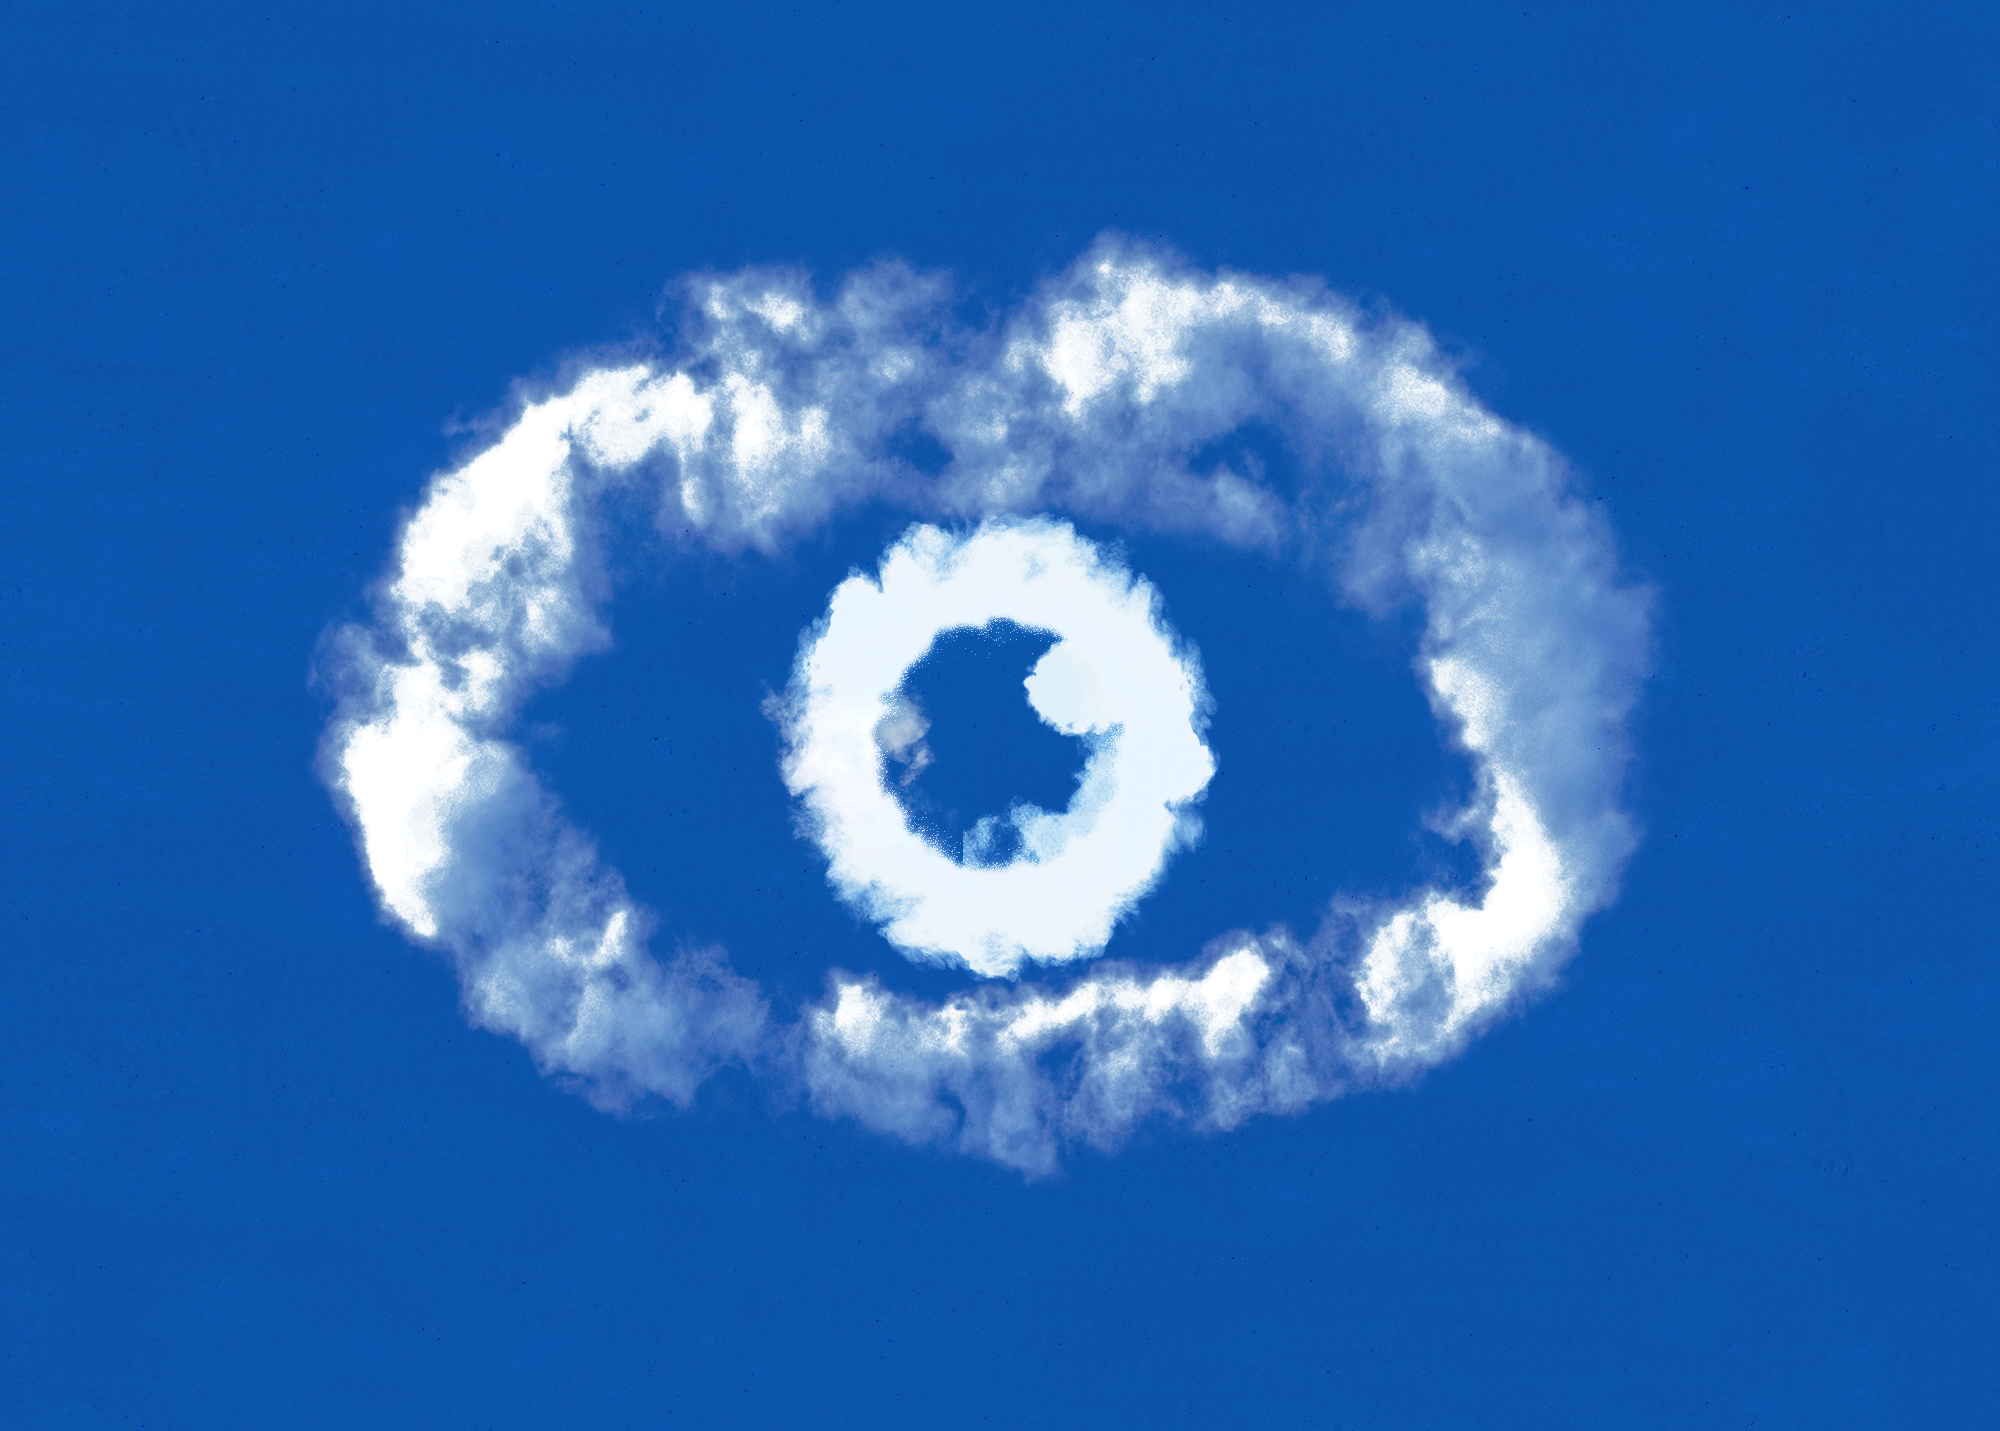 Cloudlike white forms in the shape of an eye against a sky-blue background